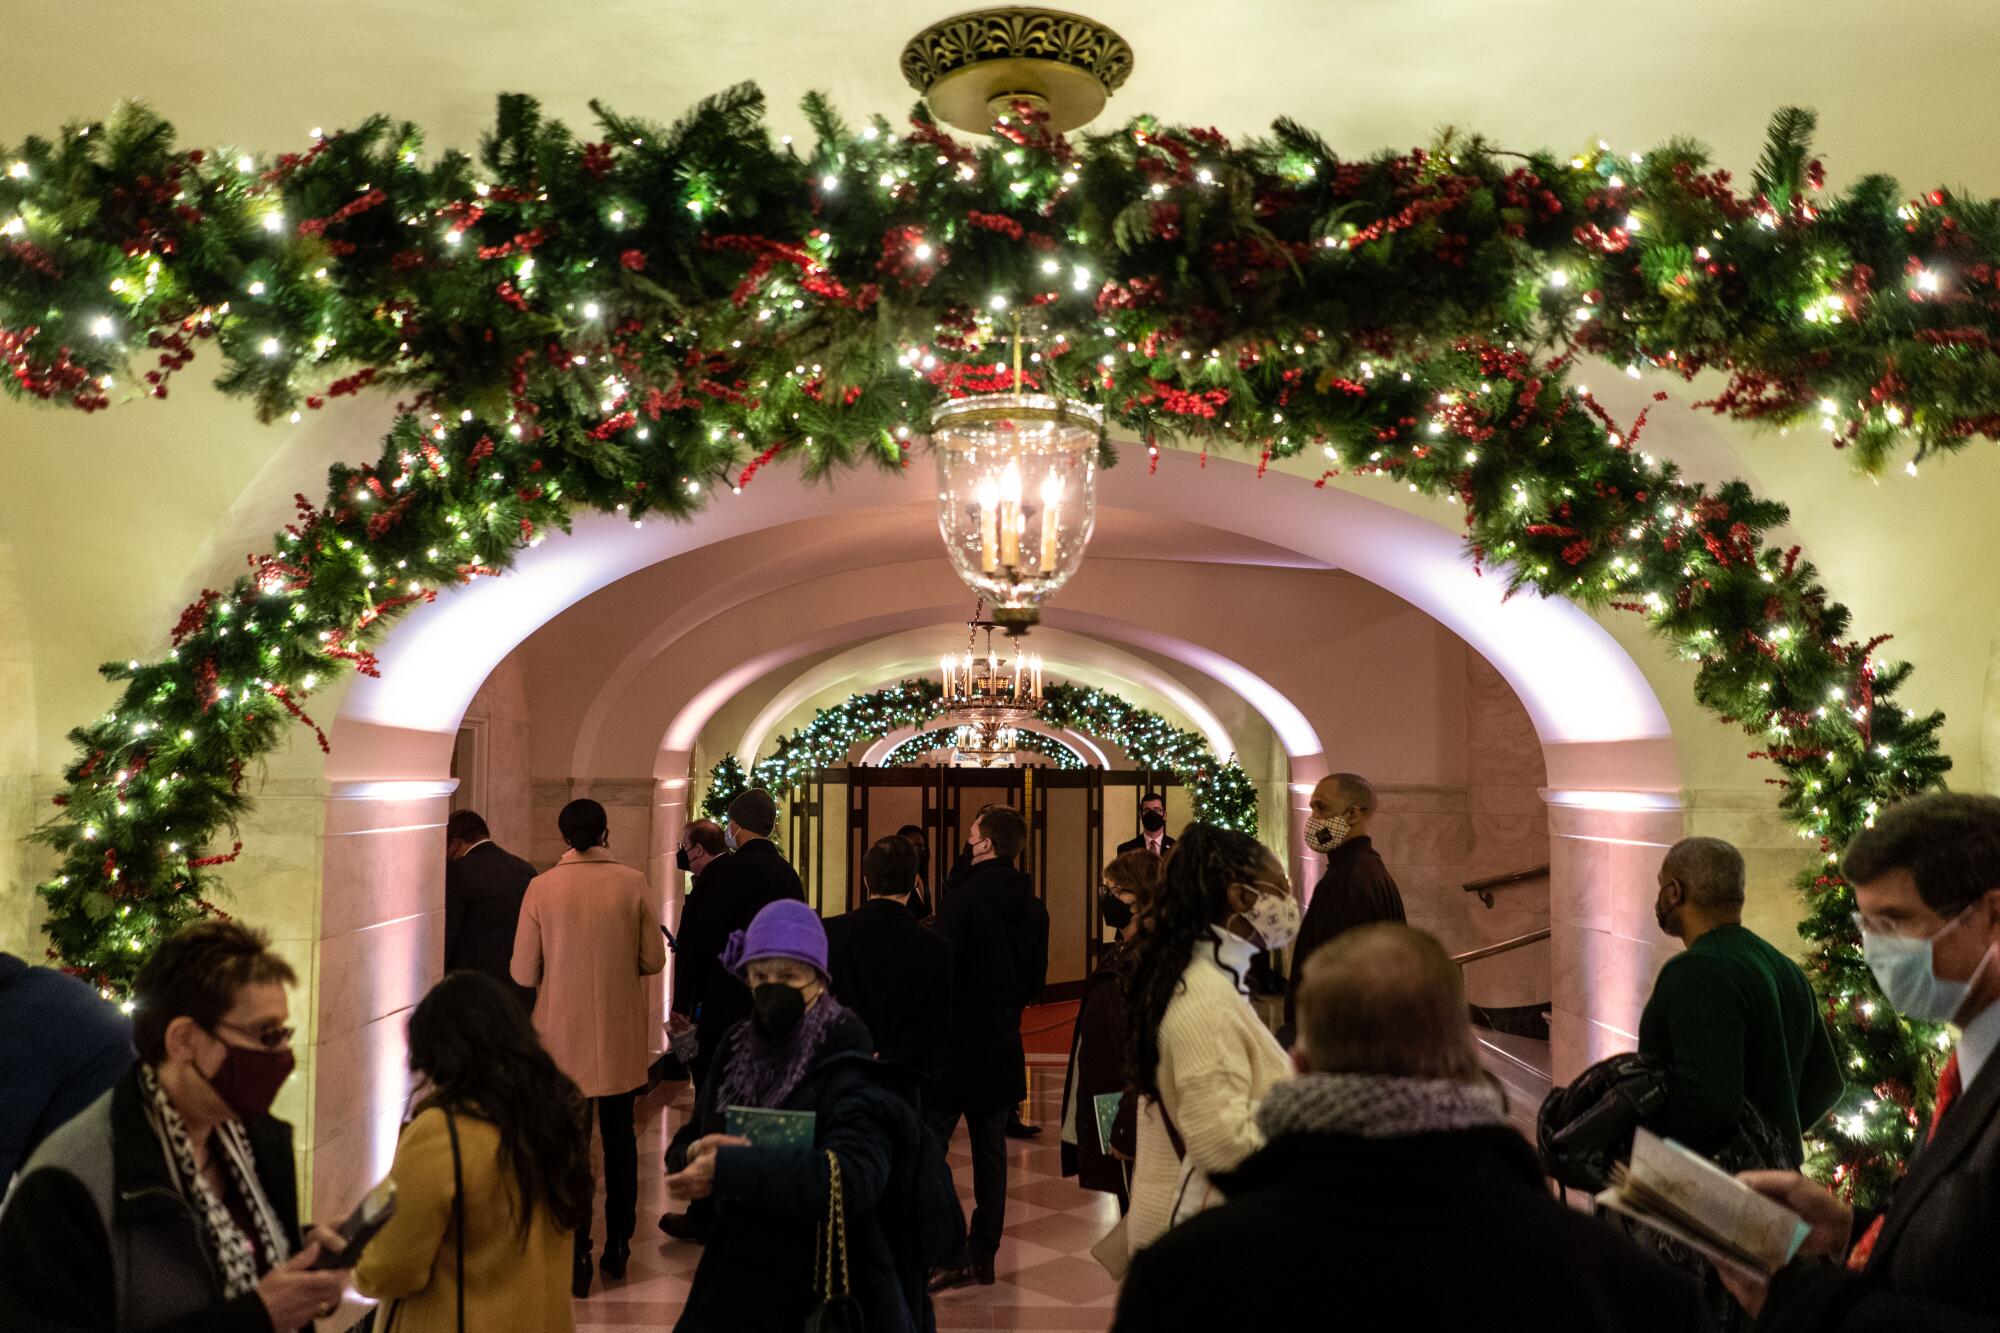 Members of the public wander the center hall of the White House during a Christmastime tour.